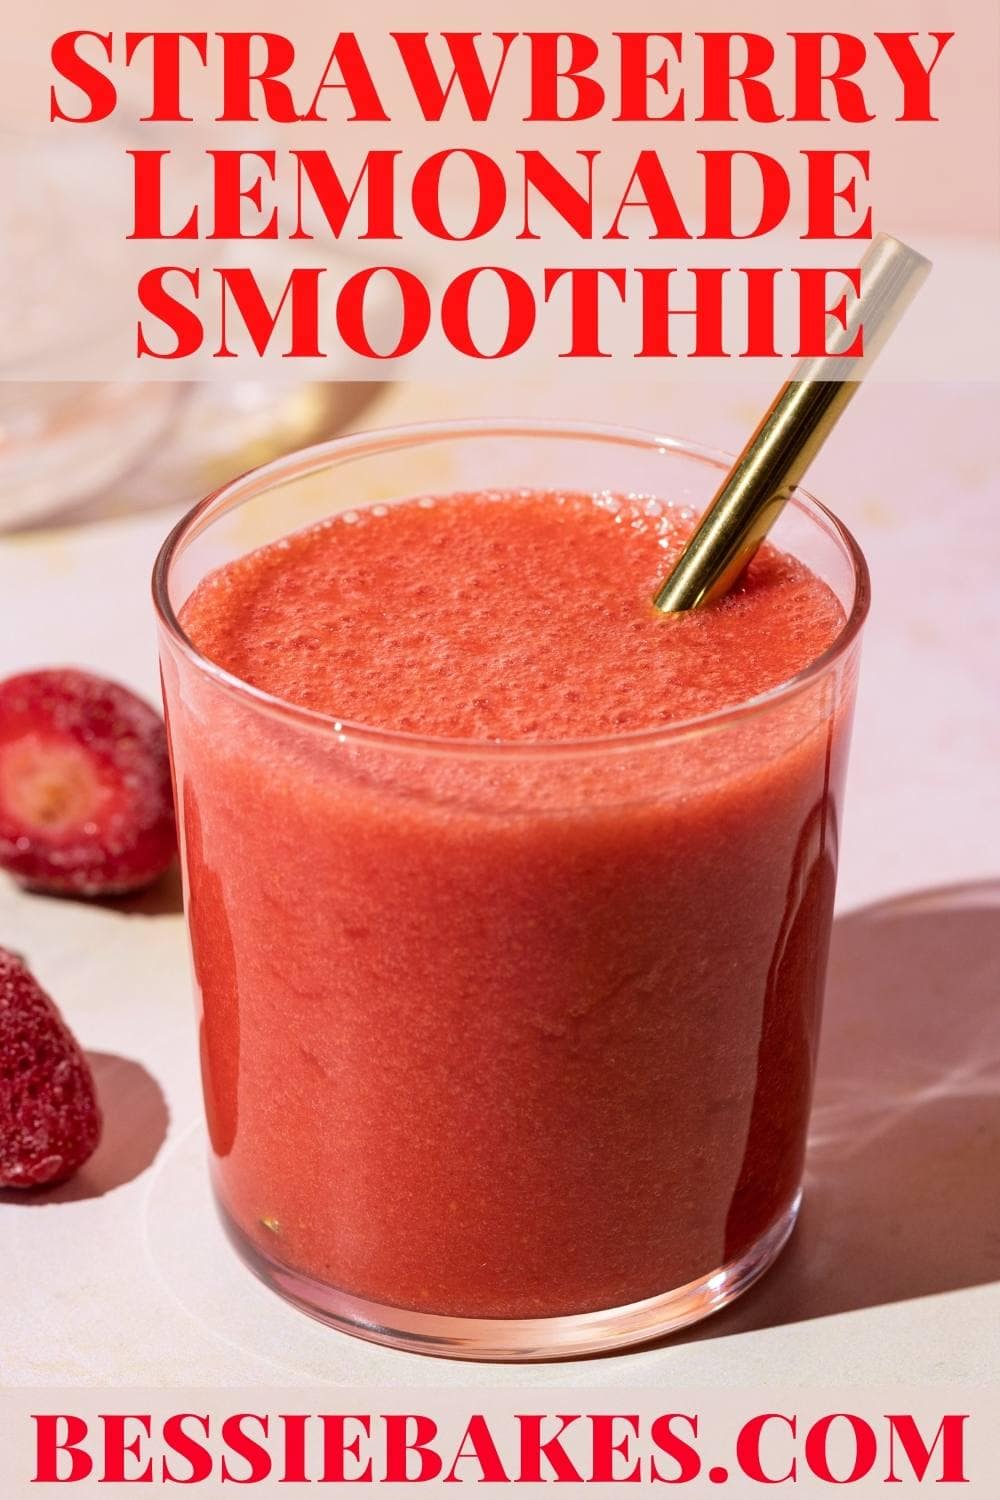 This smoothie is a refreshing show stopper! Vibrant red, tangy lemonade, and sweet strawberries come together to make strawberry sunshine. It’s the easiest must-have drink to make EVER. via @bessiebakes